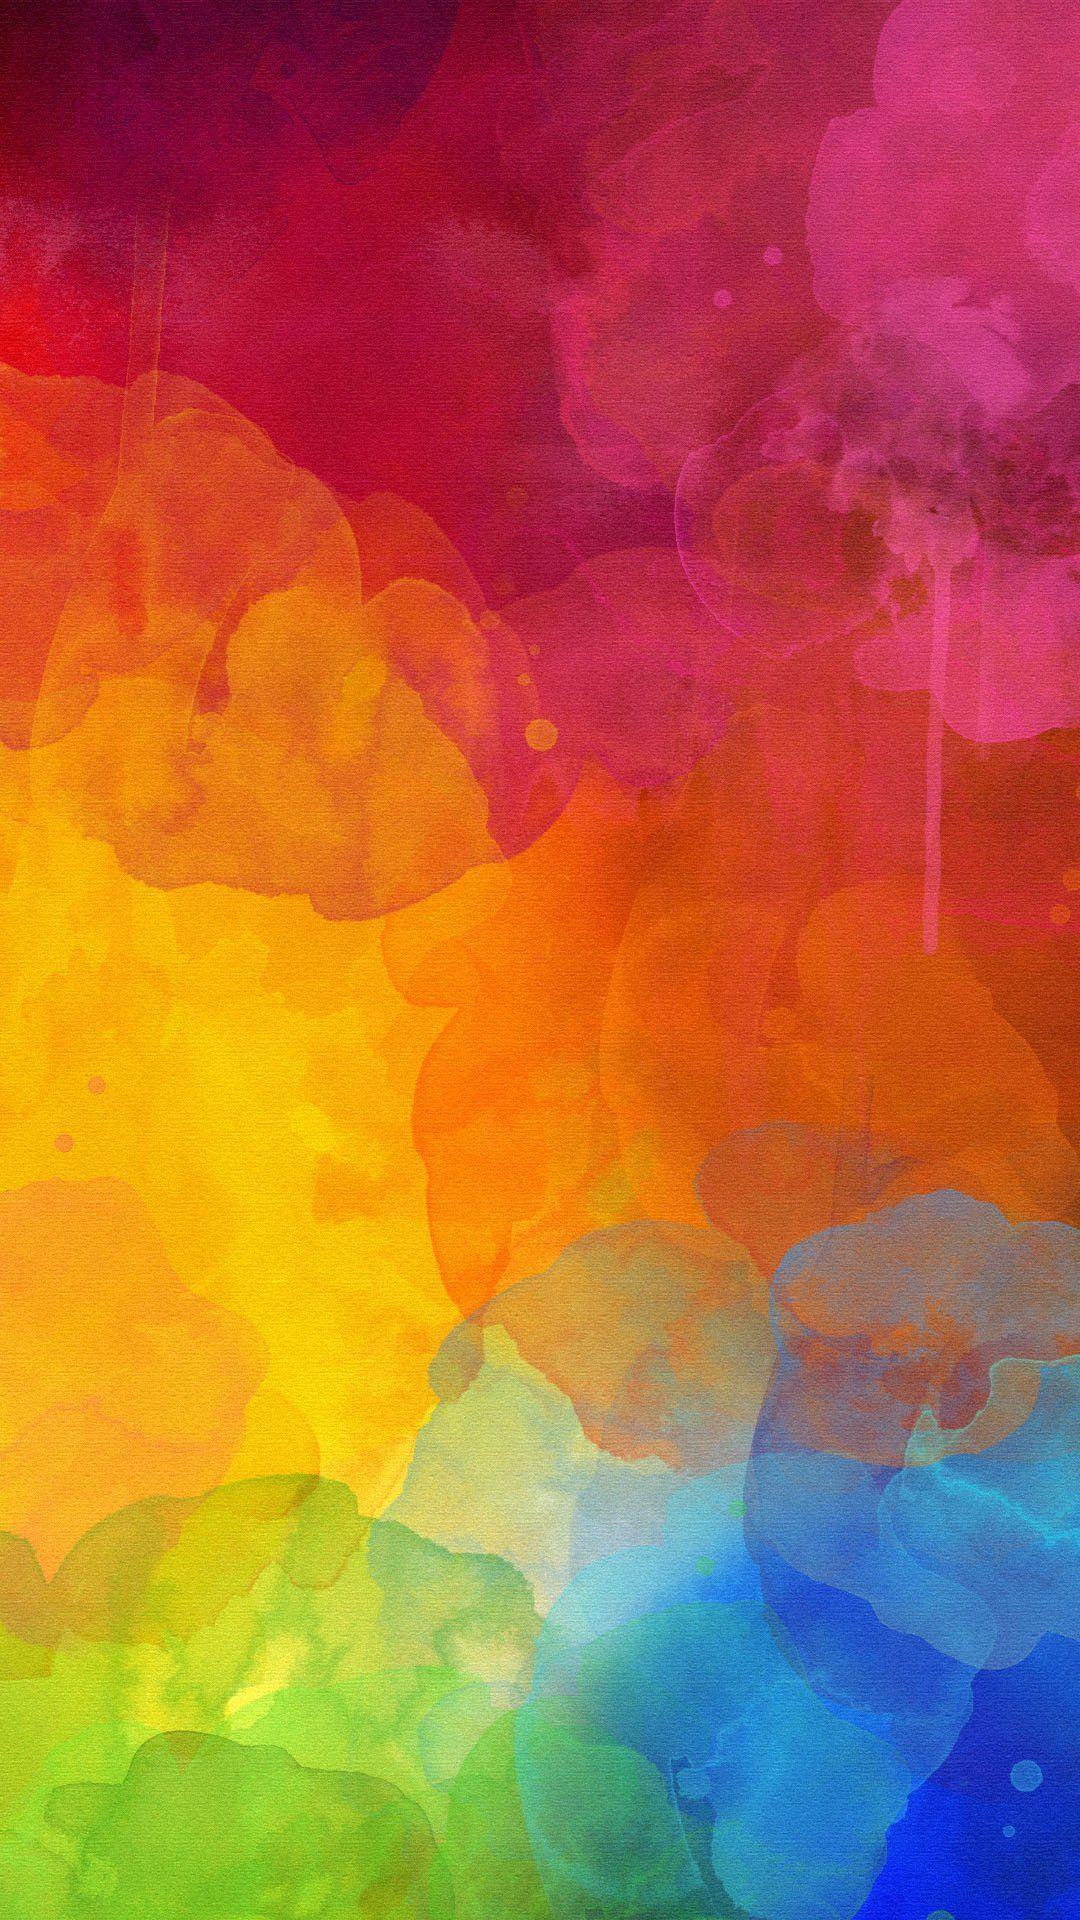 Try these awesome abstract wallpaper from Xiaomi's Mi 4